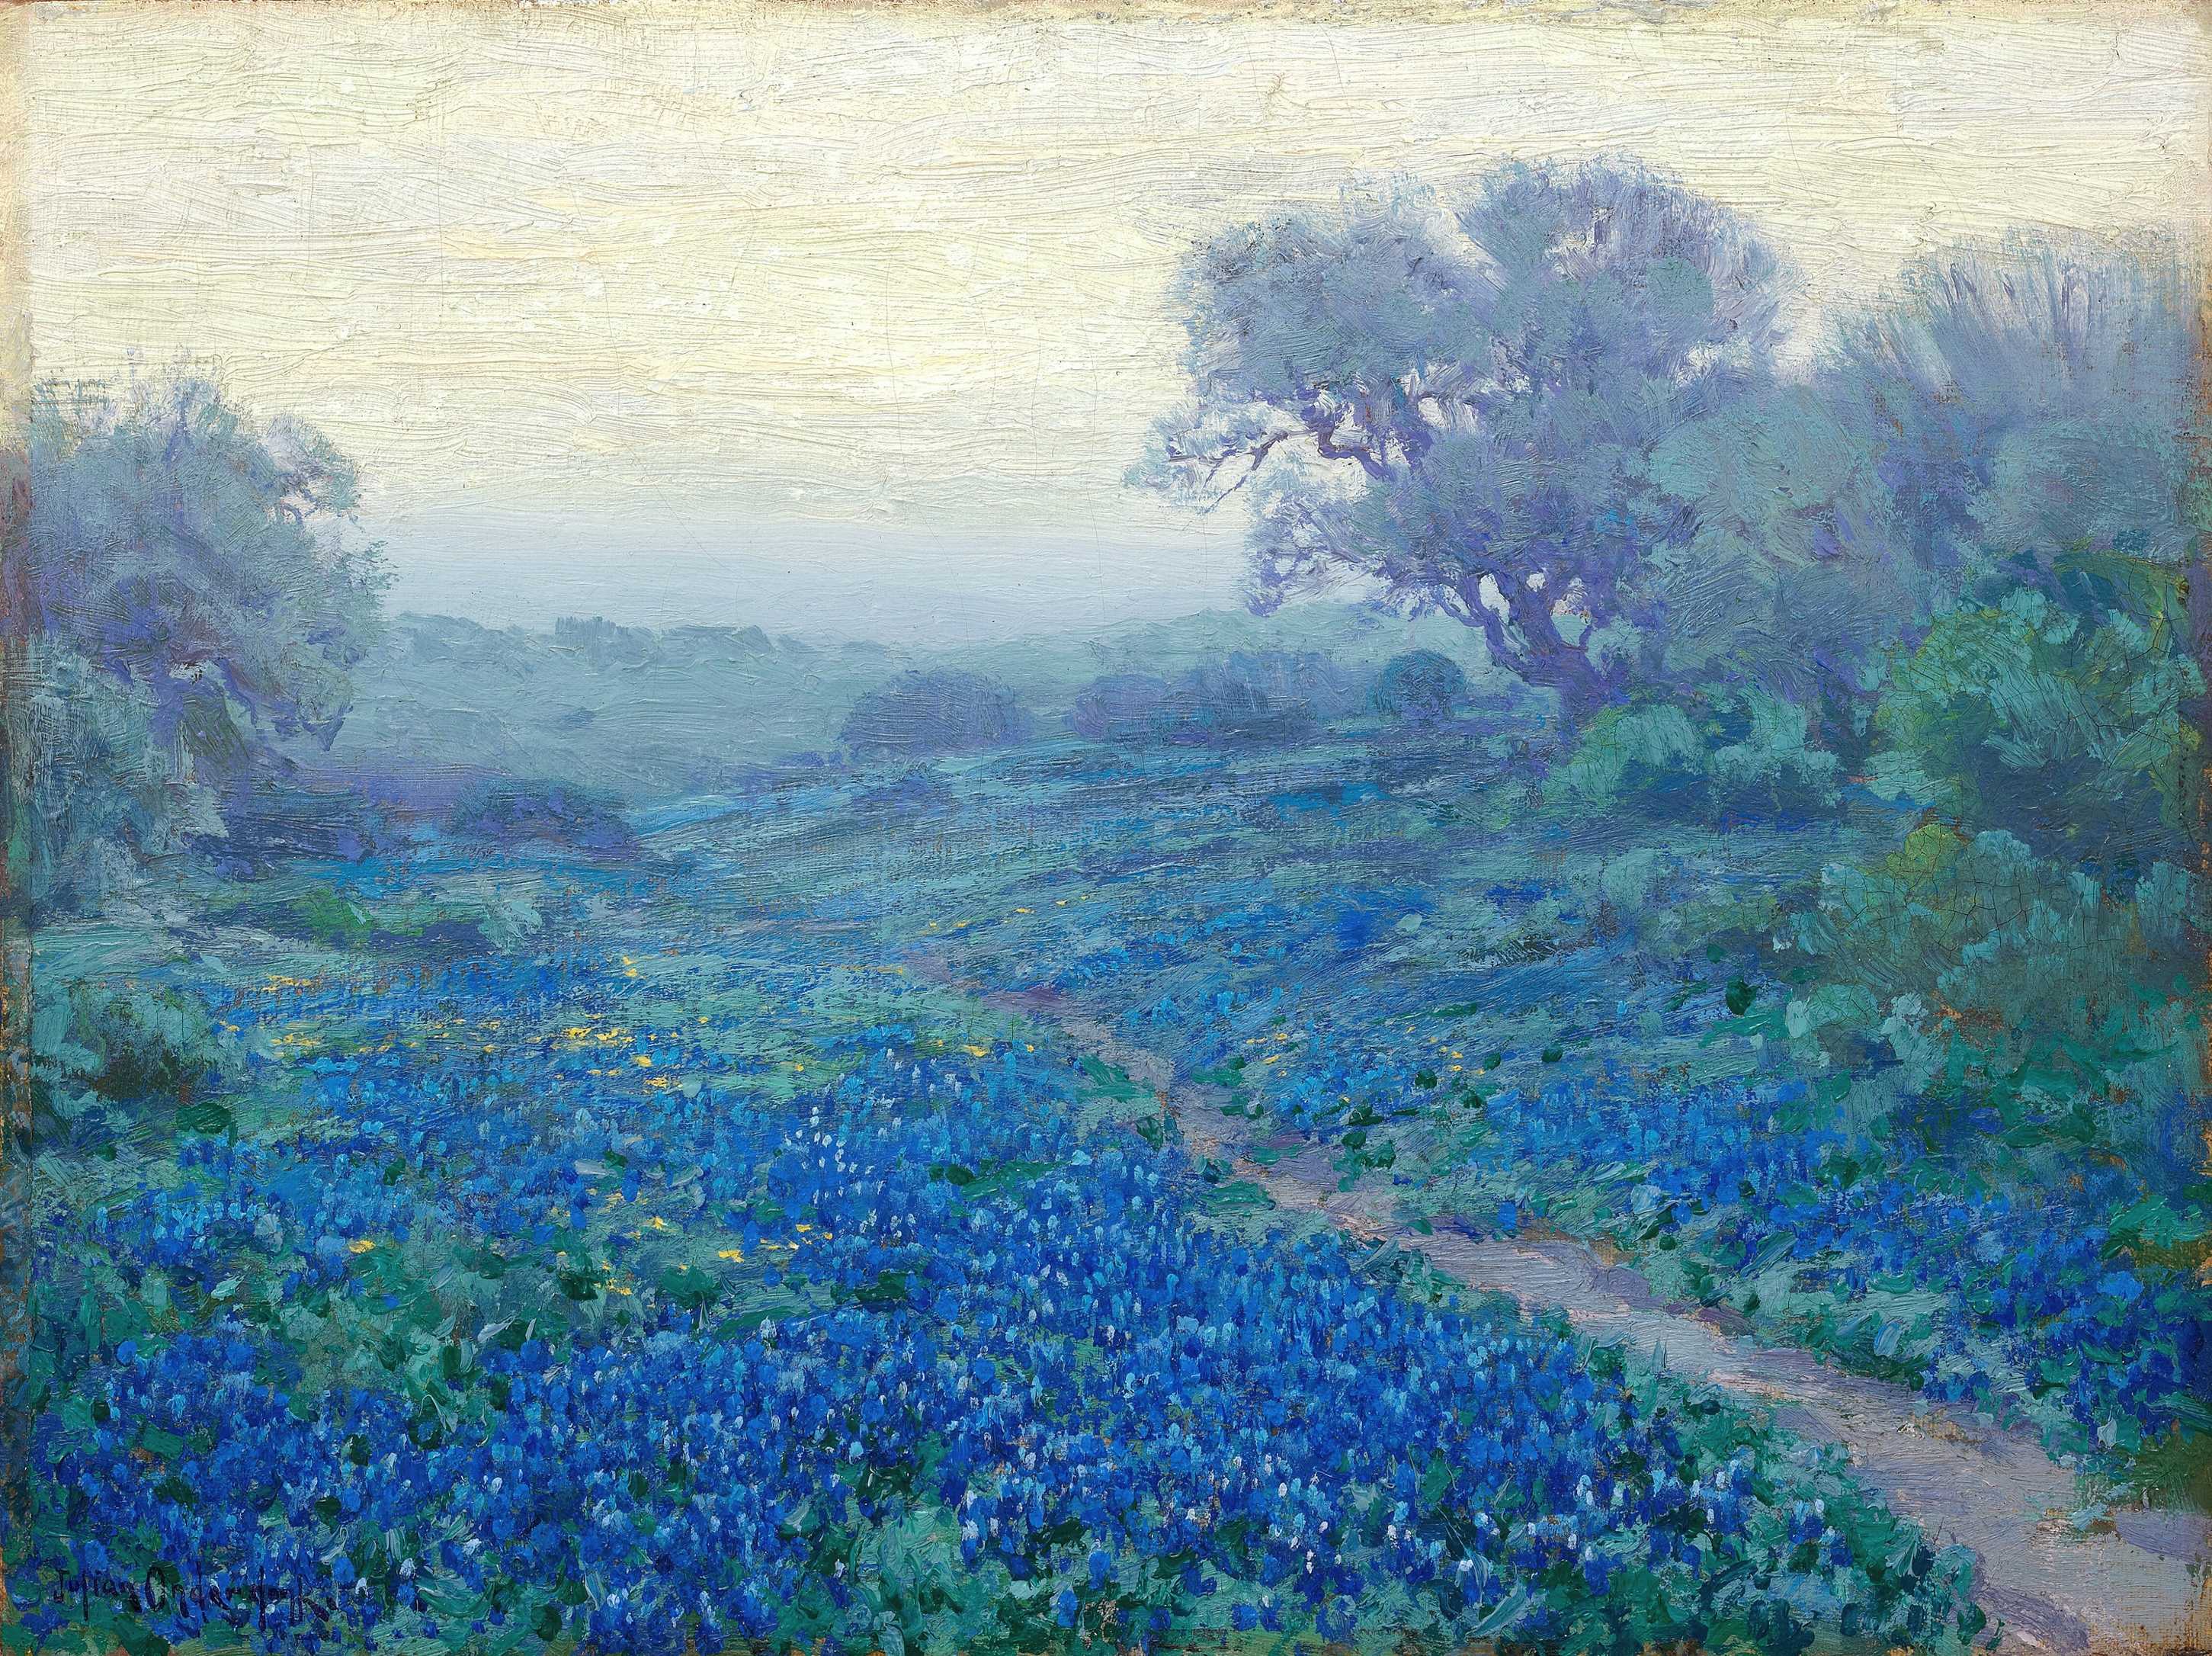 Find out more about Julian Onderdonk - Bluebonnets at Sunrise